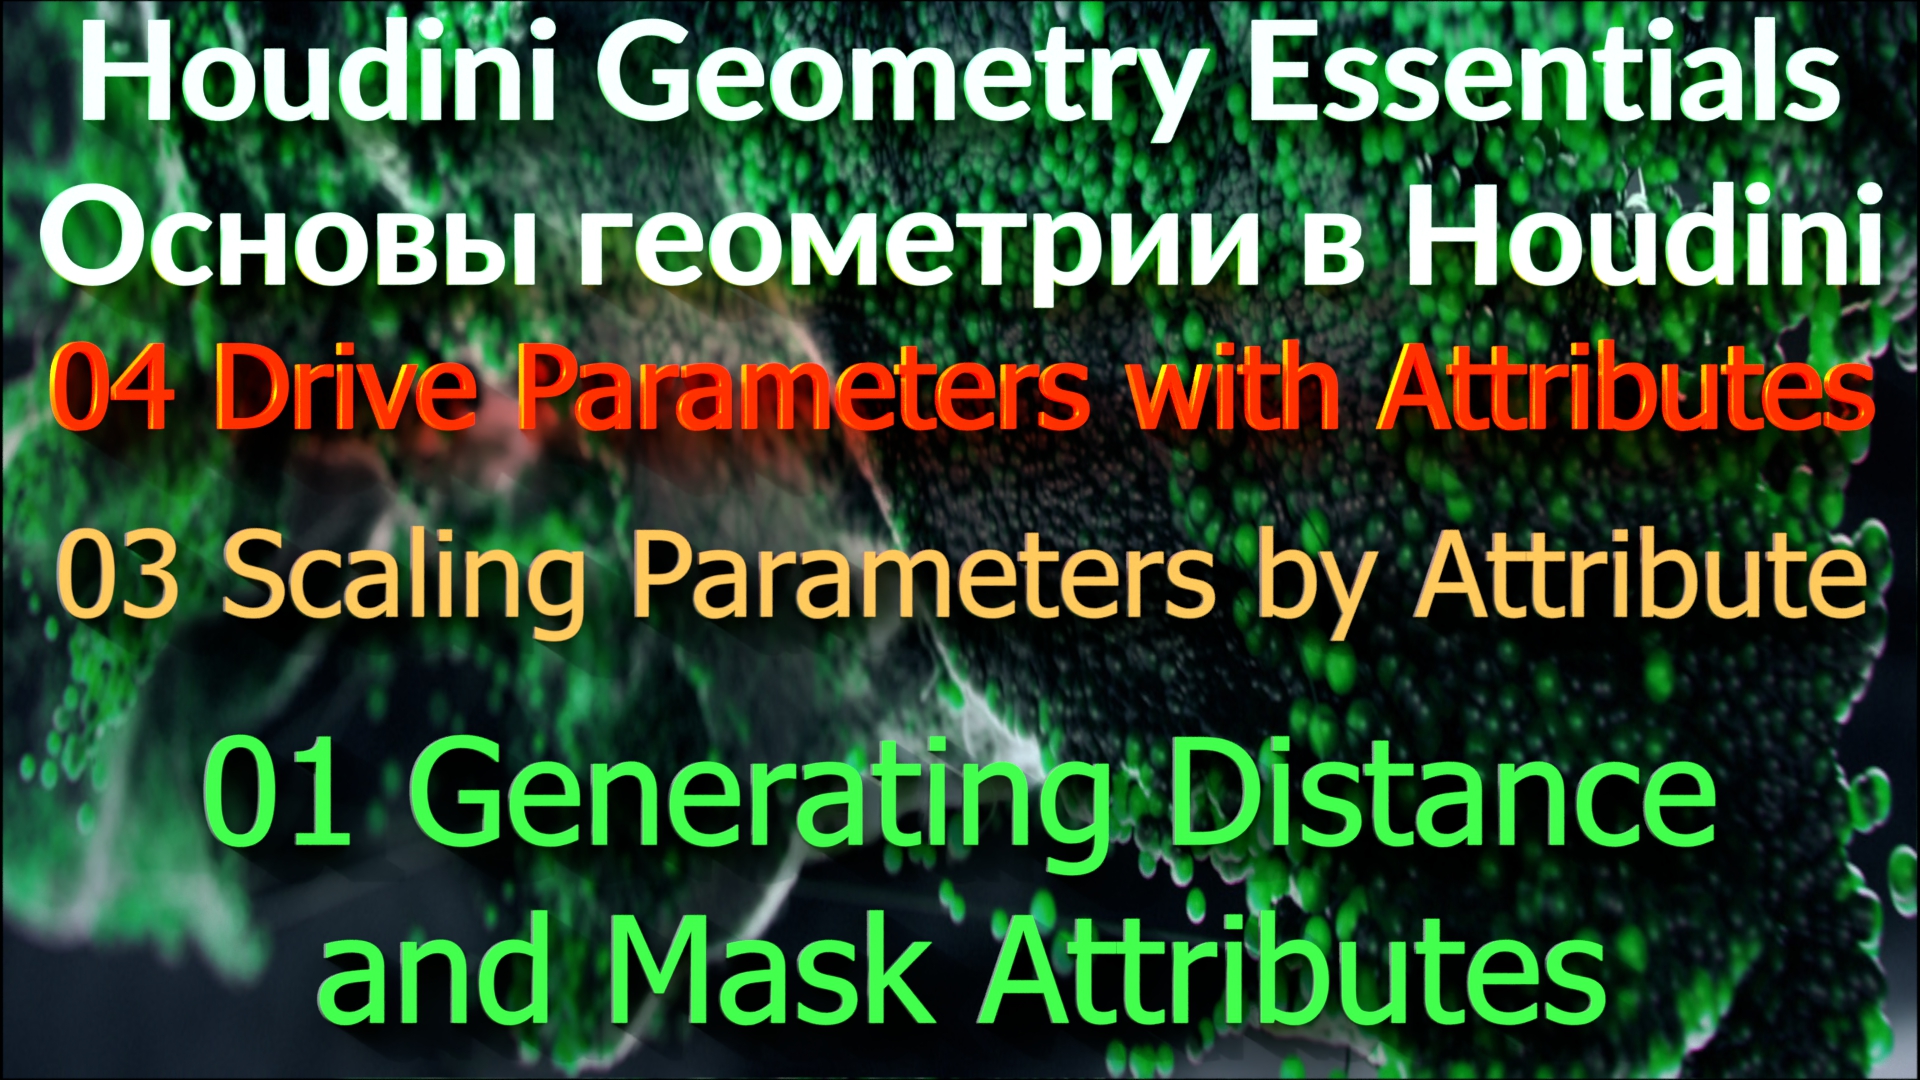 04_03_01 Generating Distance and Mask Attributes